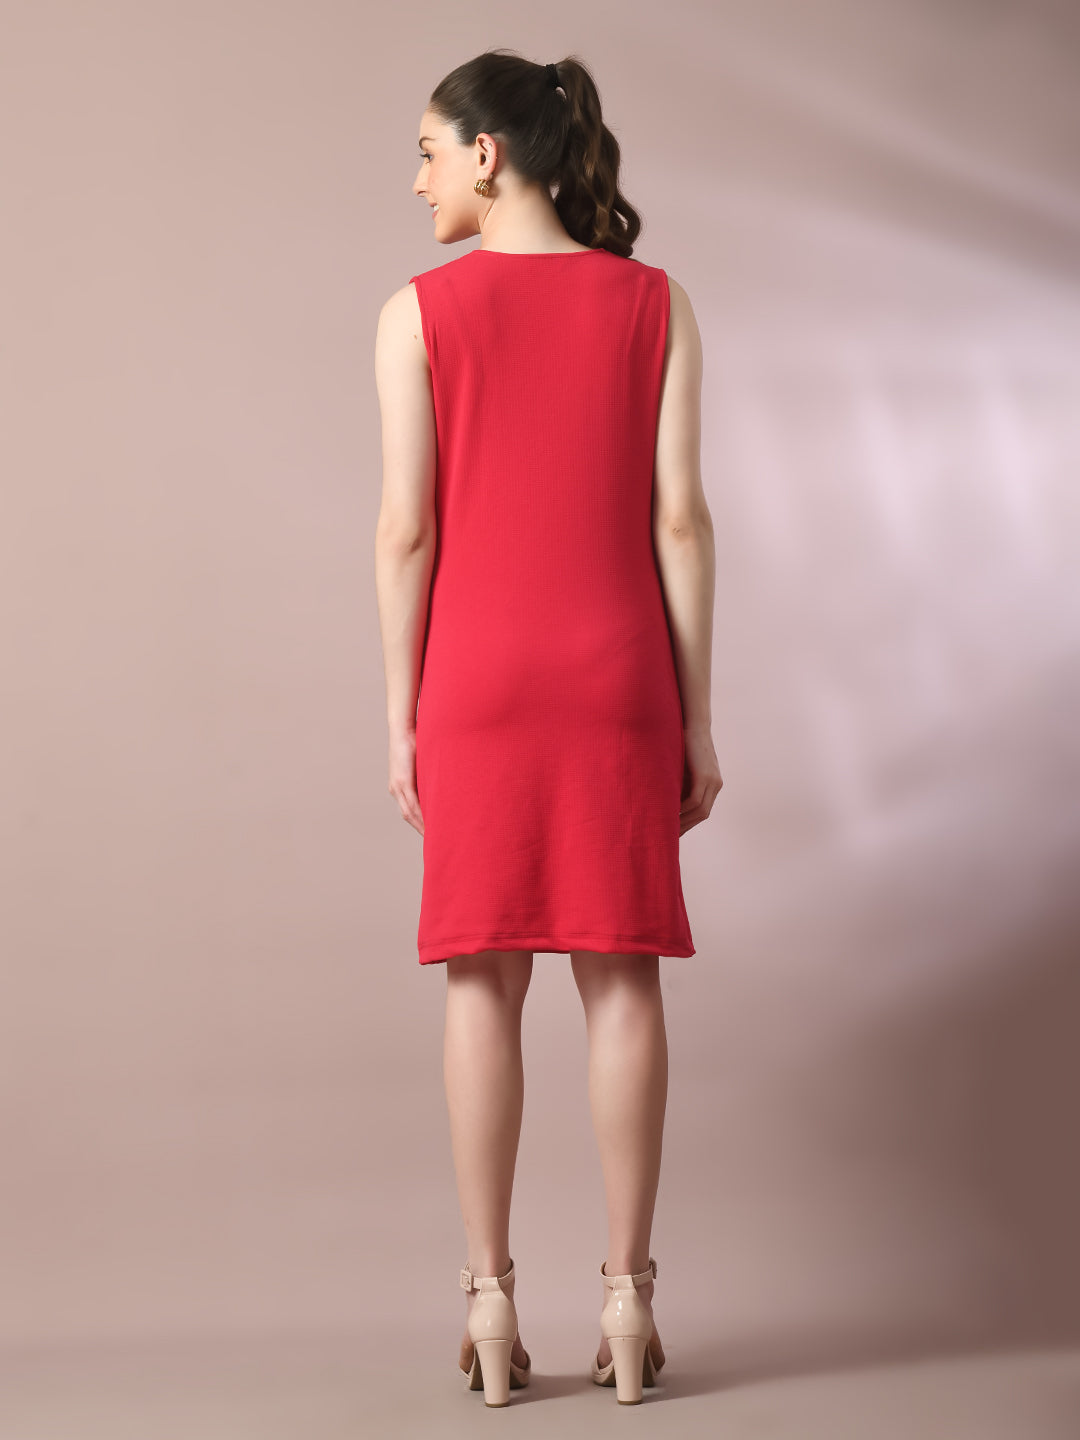 Women's  Pink Solid Cowl Neck Bodycon Party Dress  - Myshka